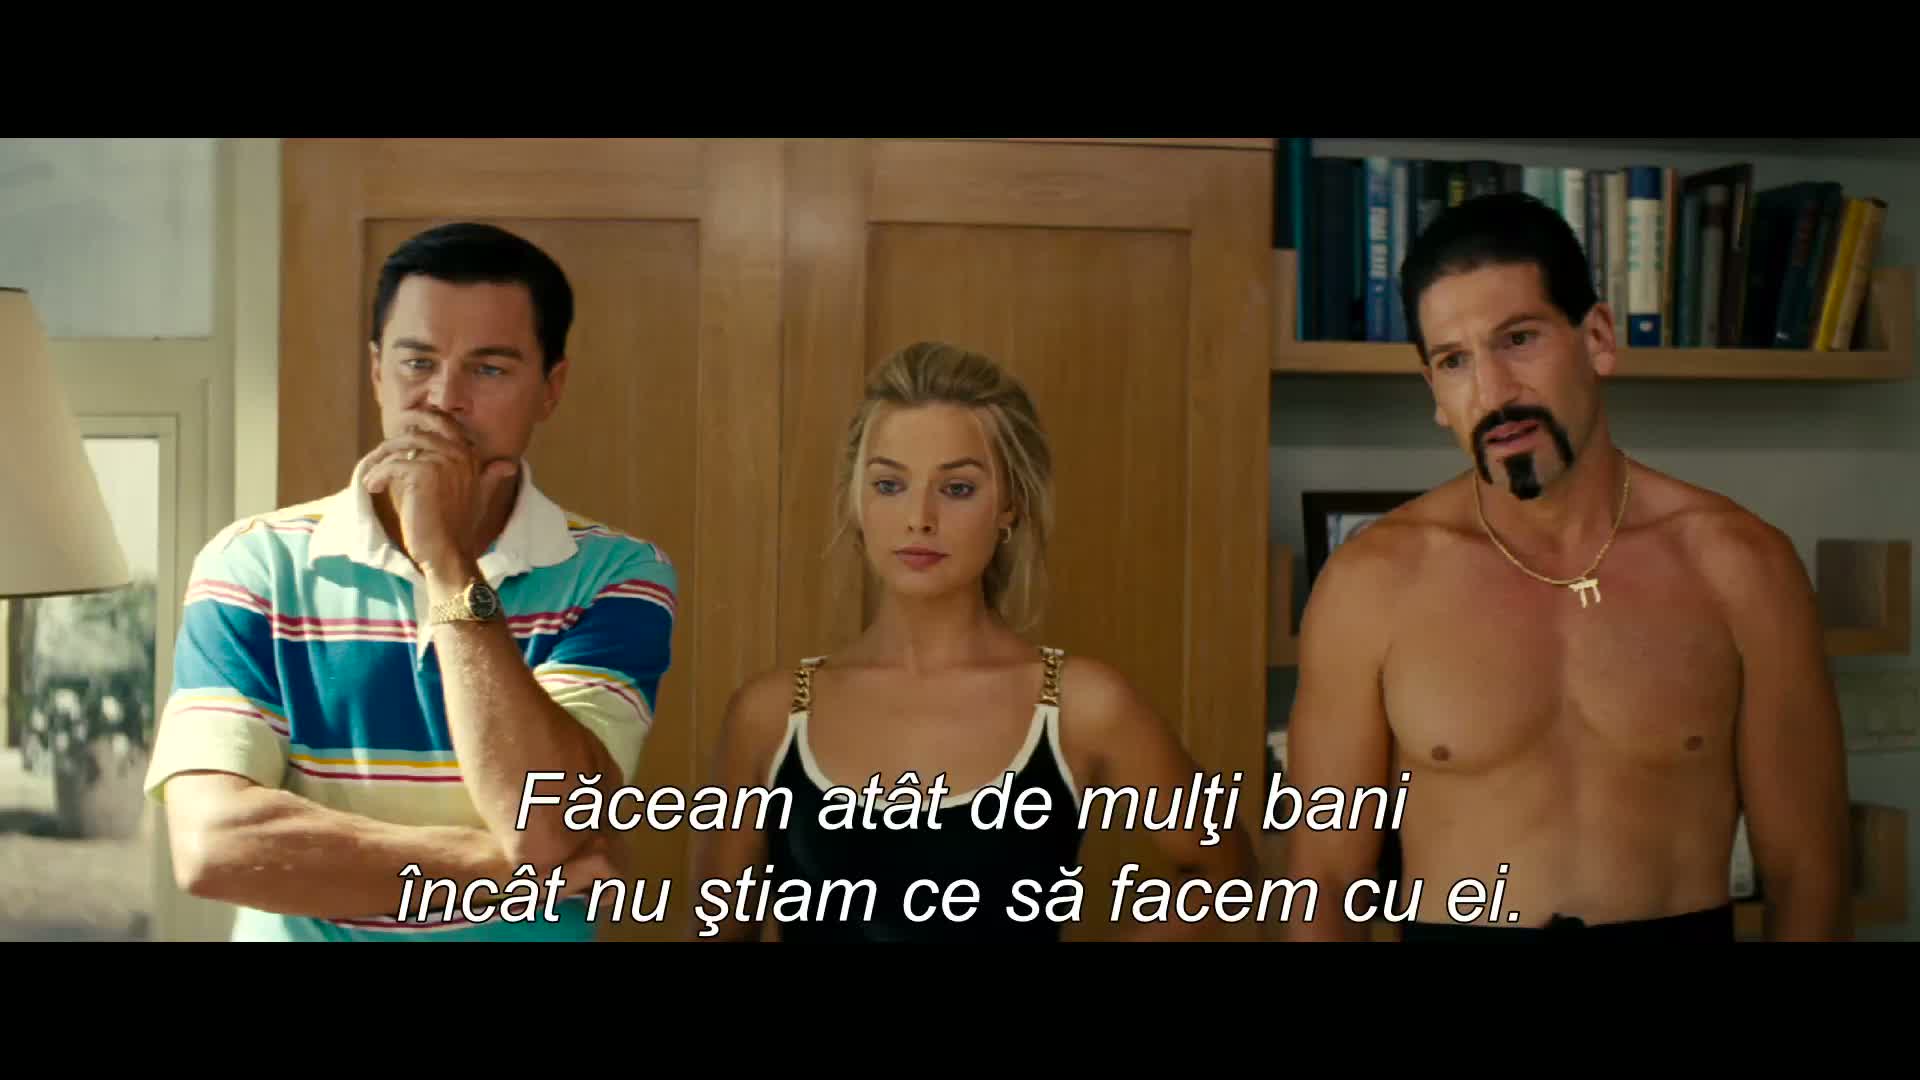 Previous Amuse tobacco The Wolf of Wall Street - Lupul de pe Wall Street (2013) - Film -  CineMagia.ro